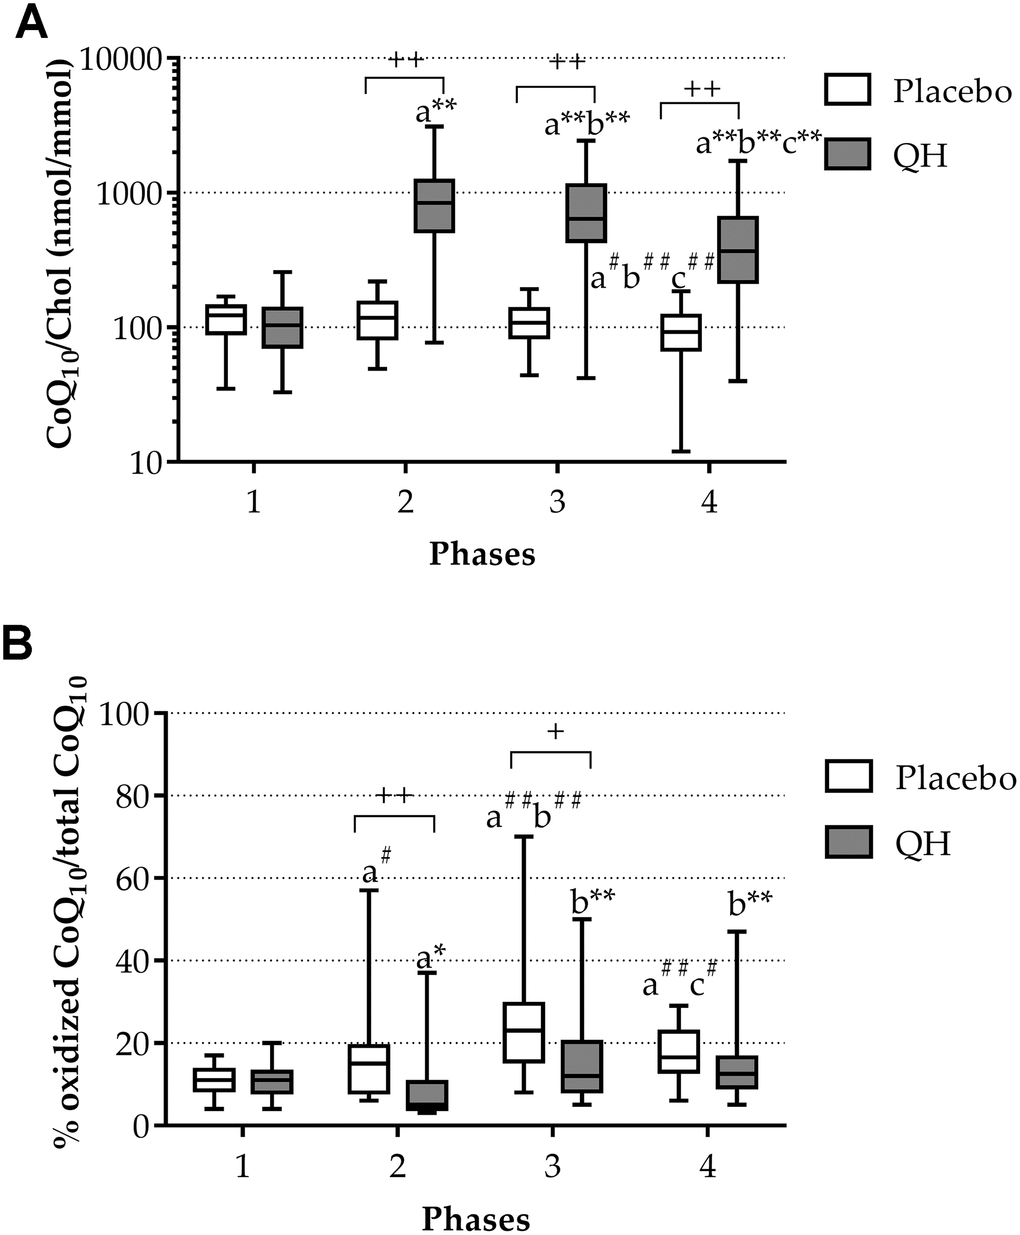 Total CoQ10 plasma levels normalized to cholesterol (A) and its oxidative status (B) in placebo (white) and QH treated (grey) groups during the four experimental phases. * p≤0.05, ** p≤0.01 and #p≤0.05, ##p≤0.01 significance of differences in each subgroup compared with phase 1 (a), 2 (b) and 3 (c). + p≤0.05 and ++ p≤0.01 significance of differences comparing both groups at the same experimental phase.